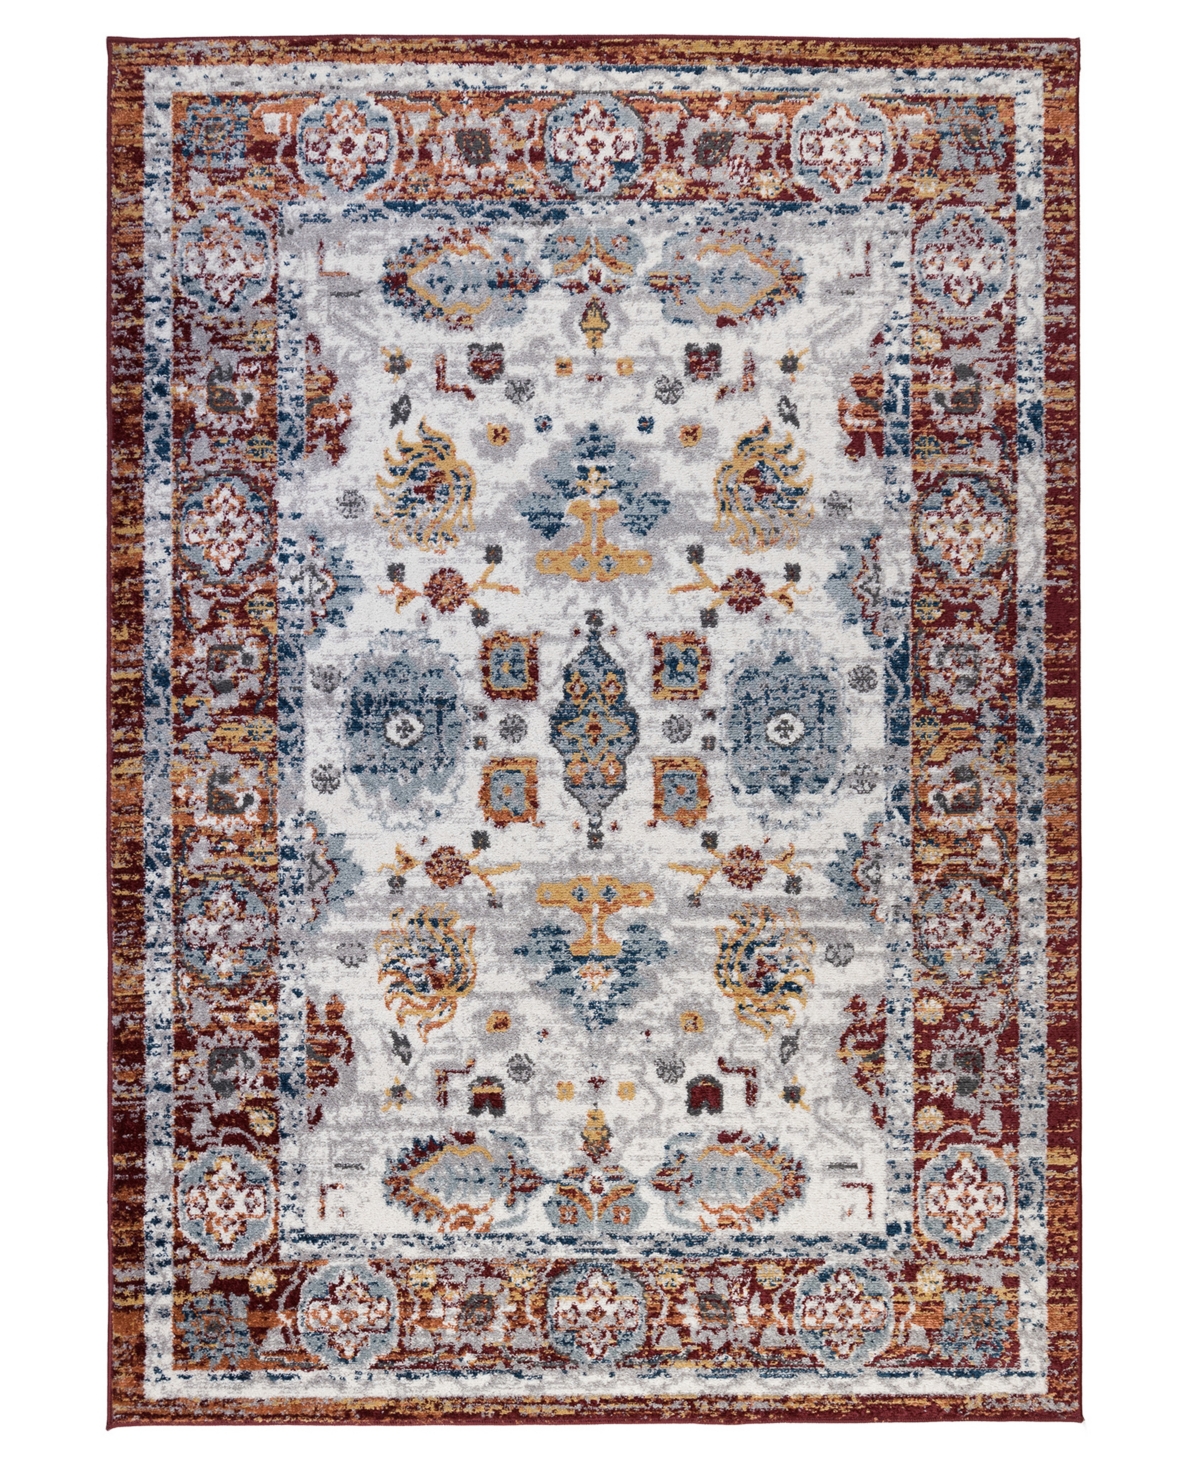 Km Home Gadsby Gad87 2' X 3' Area Rug In Brown